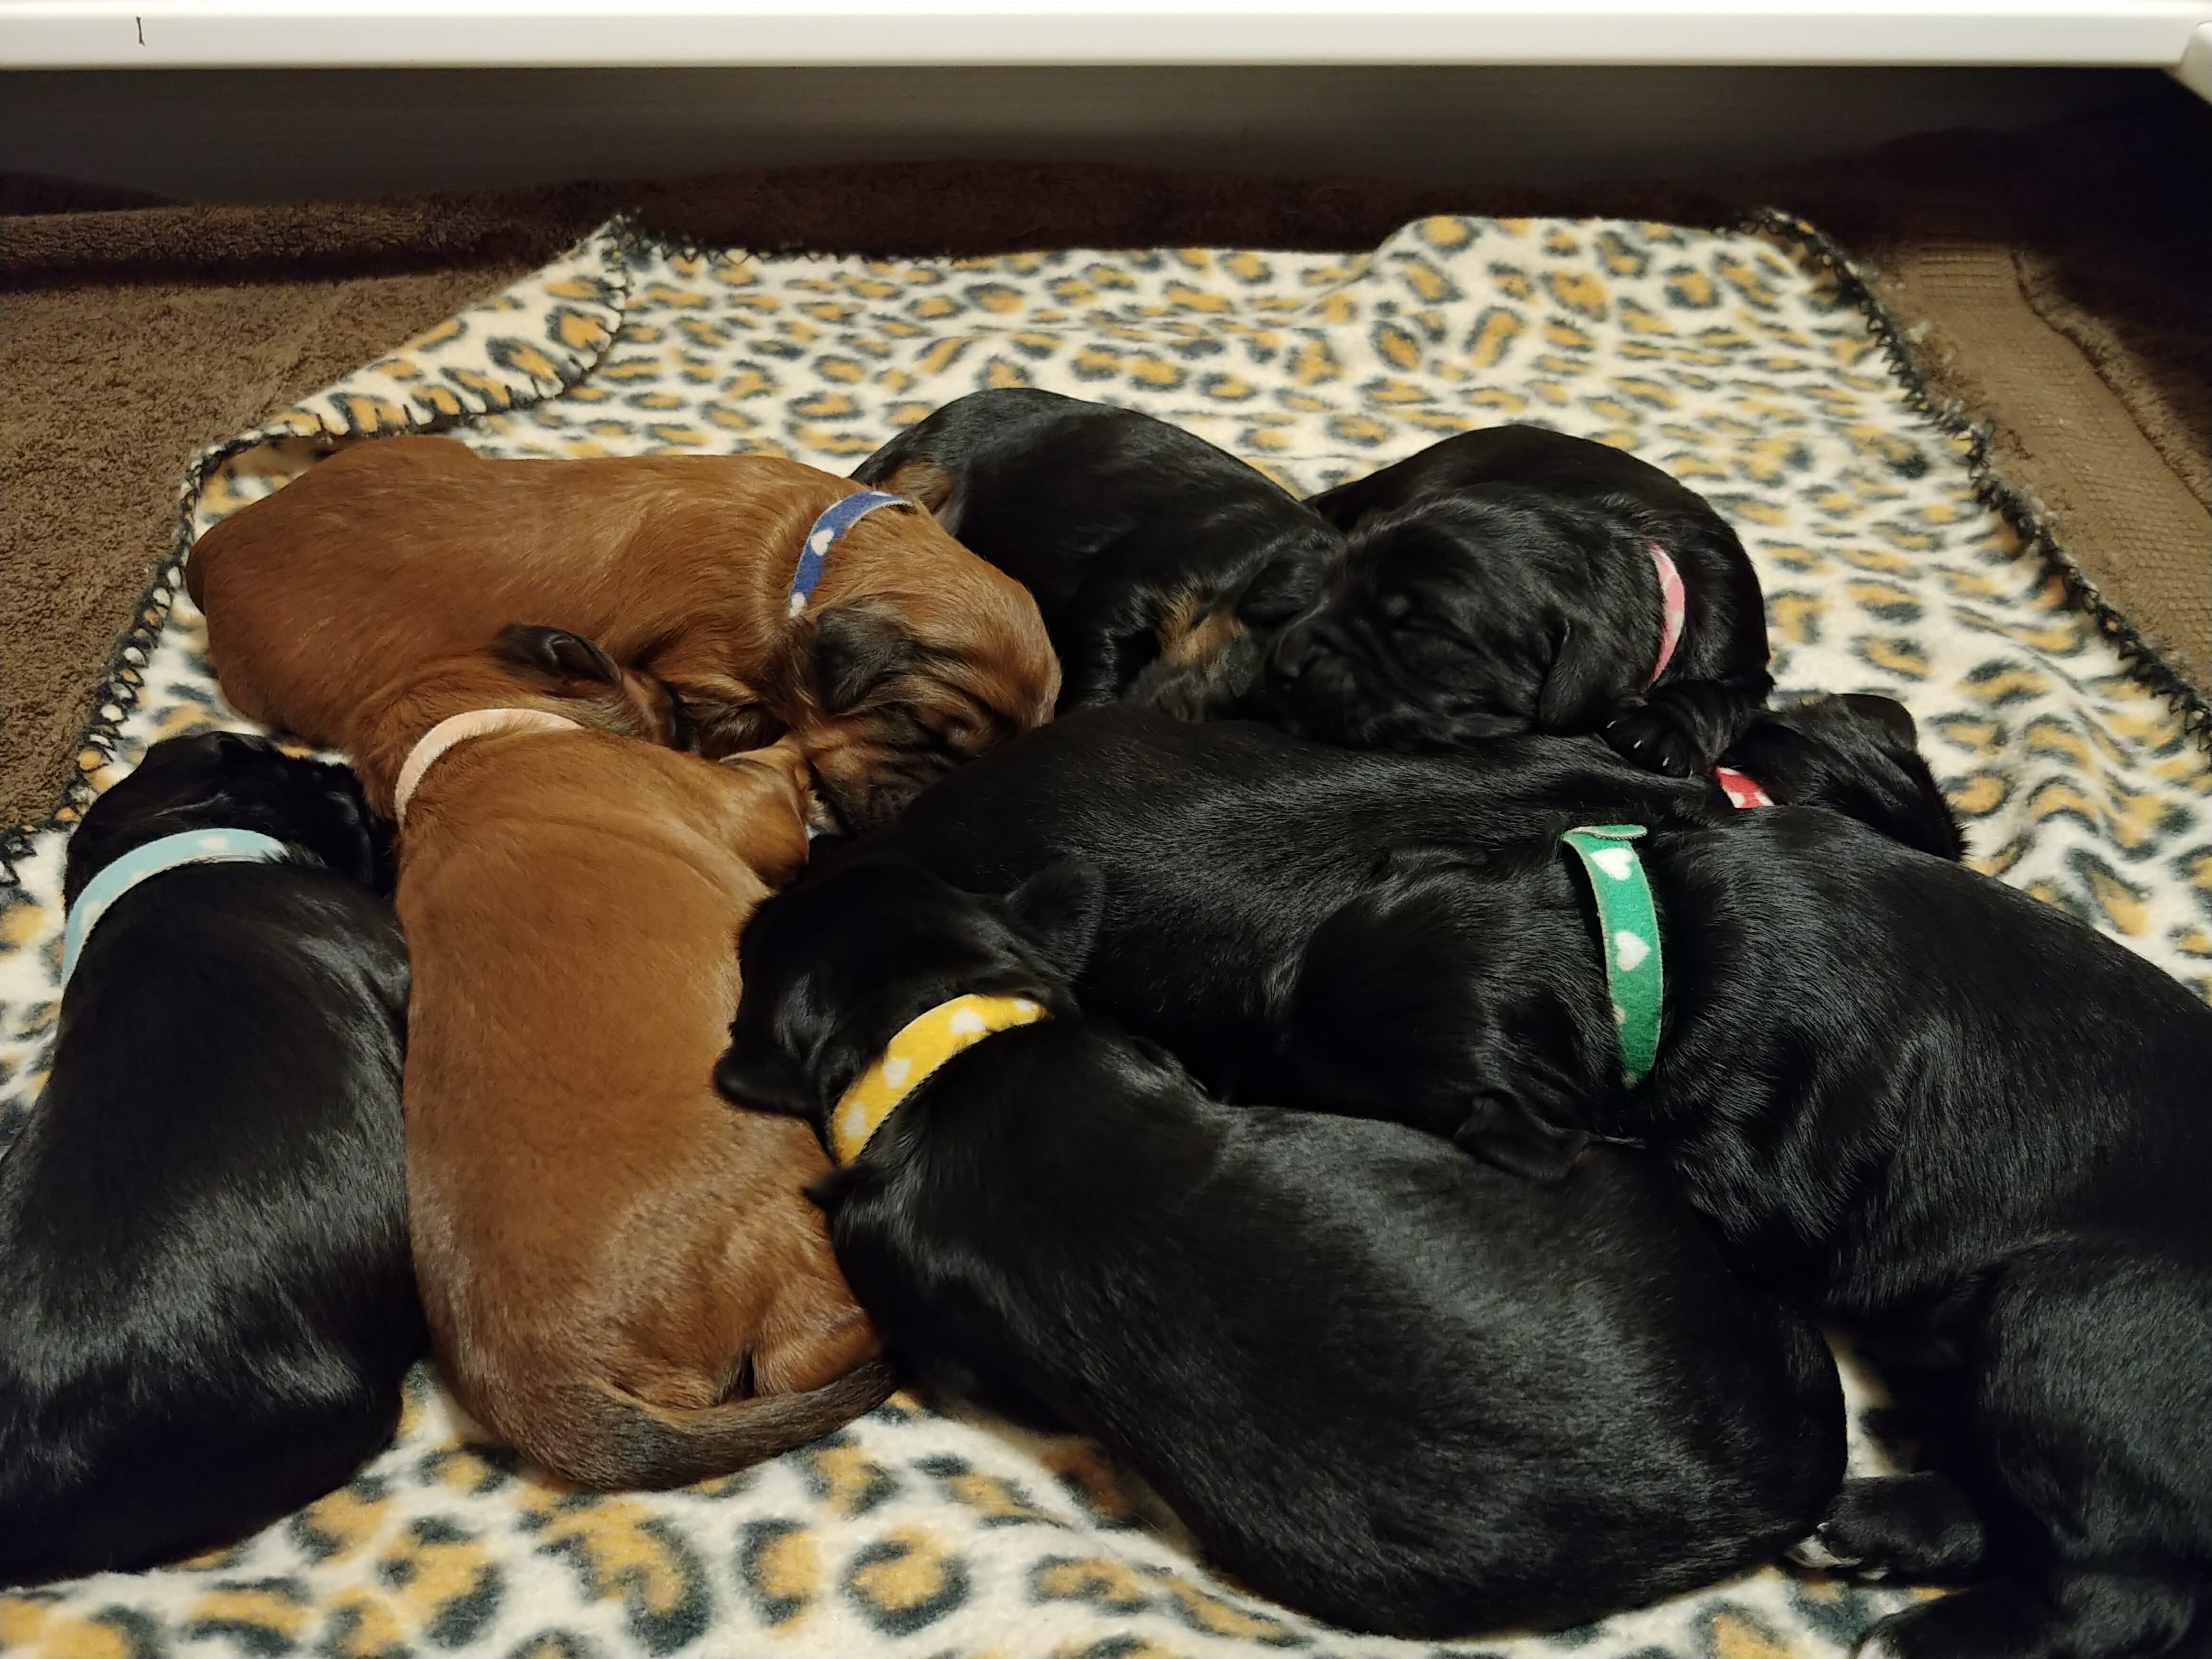 Eight 2 week old puppies snuggled together. Six chocolate and two red.